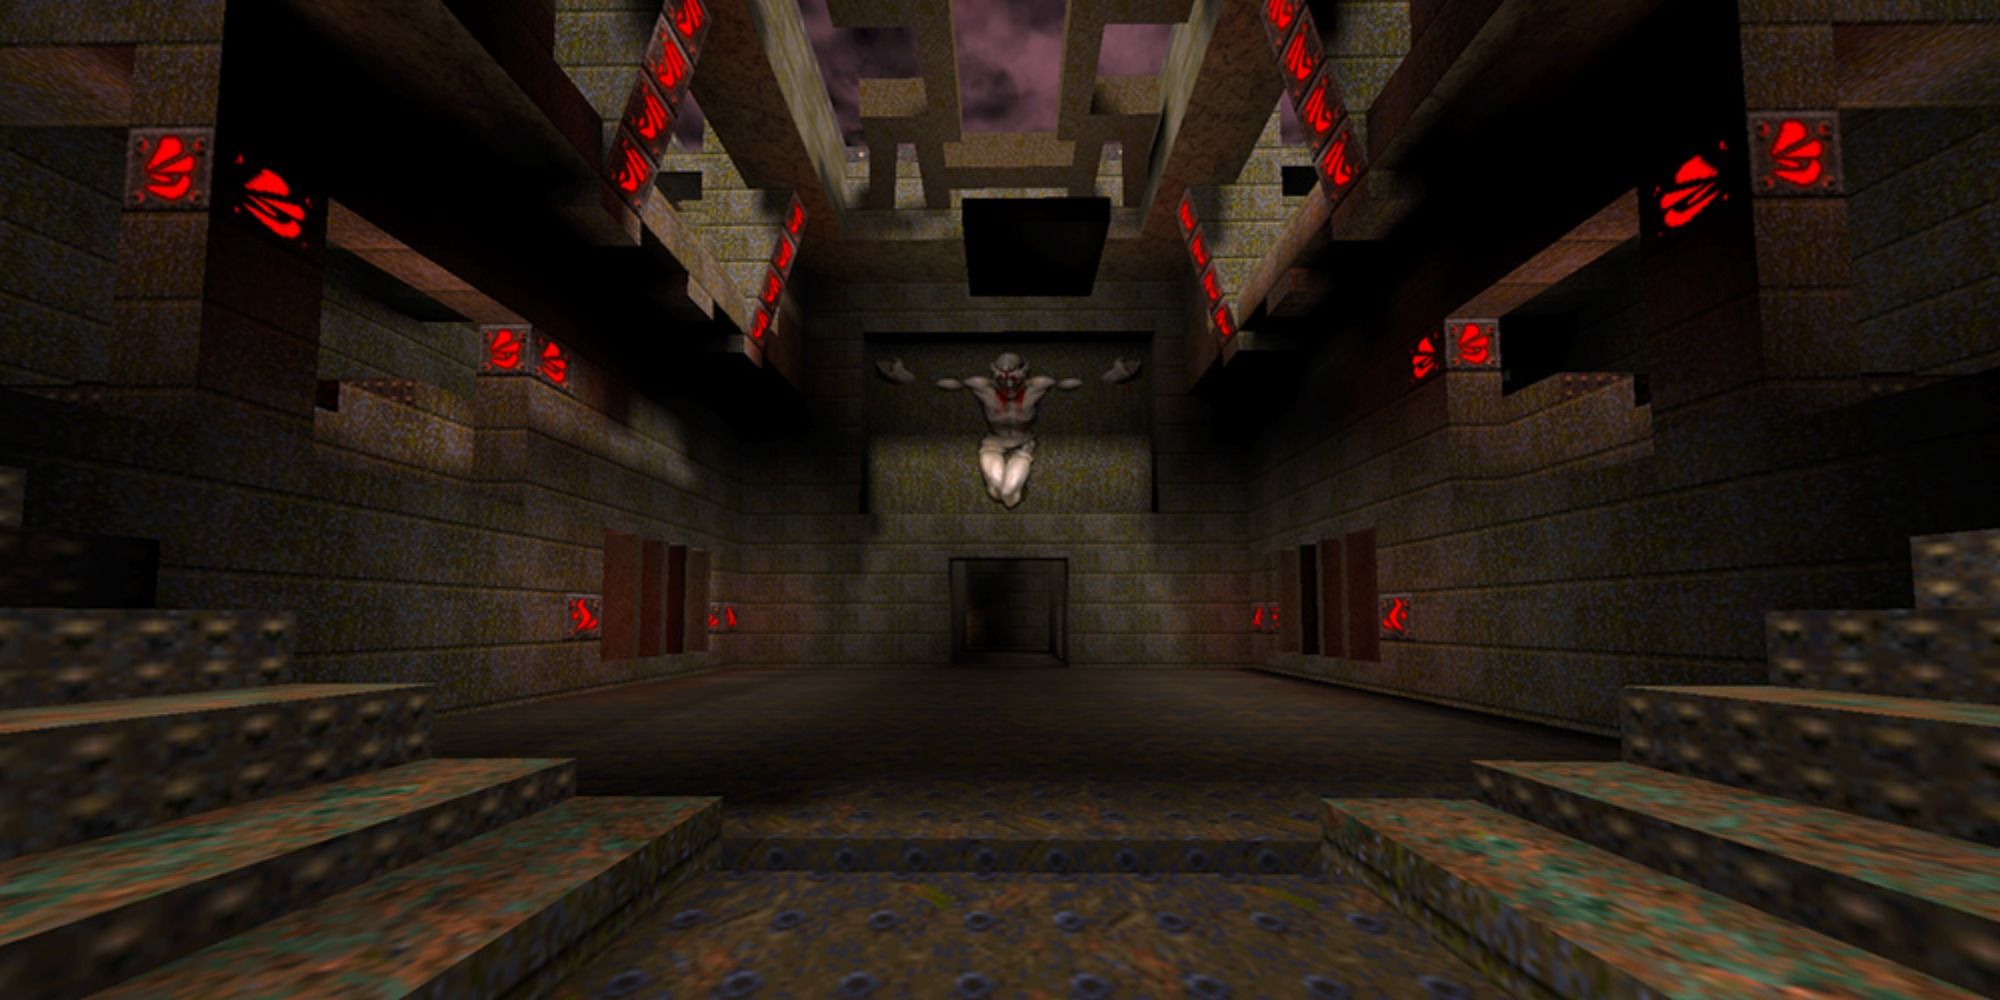 the main room of the Quake multiplayer map DM2: Claustrophobolis with bright red lights and stairs